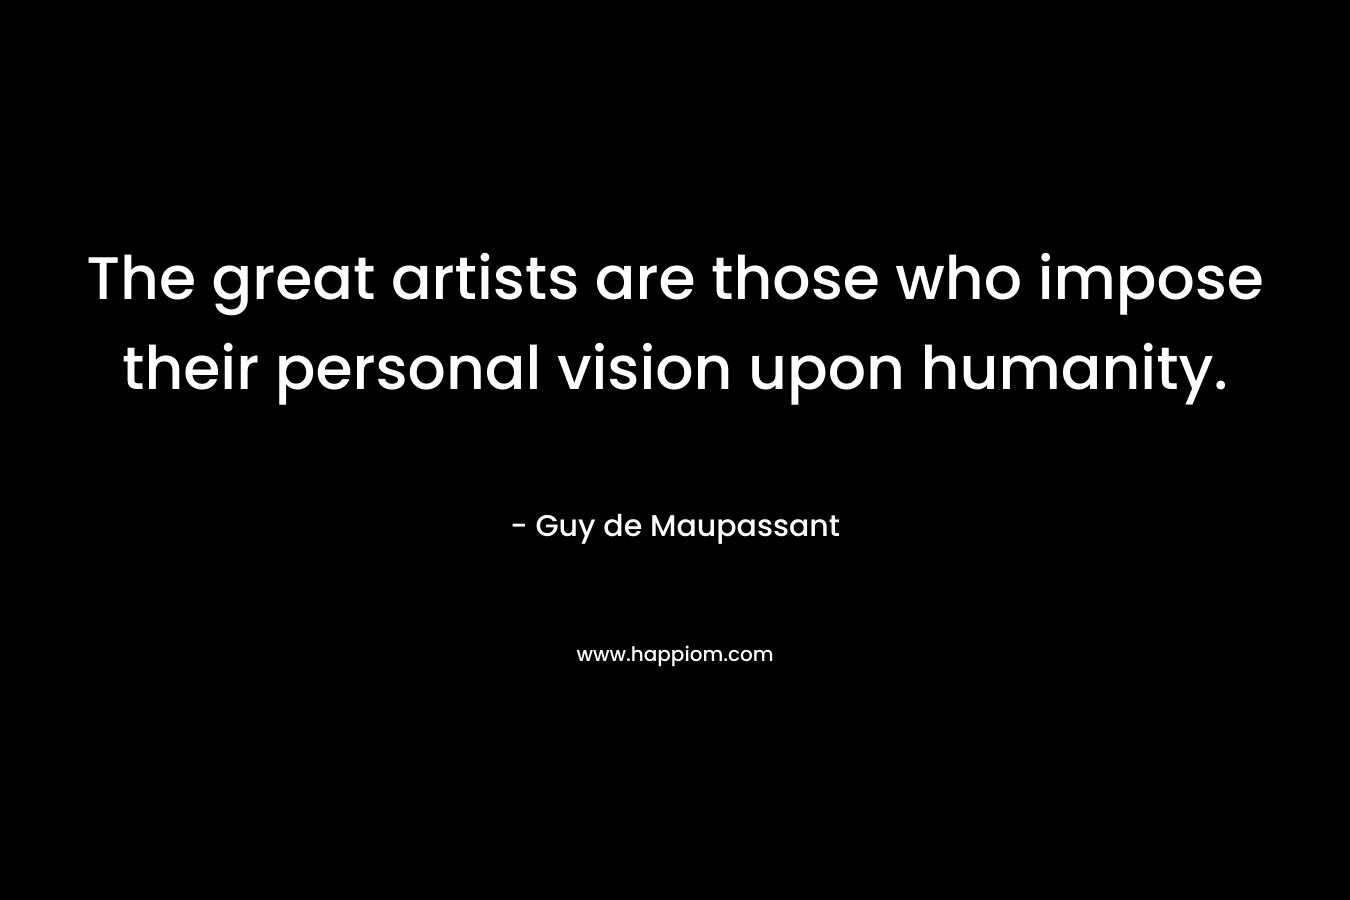 The great artists are those who impose their personal vision upon humanity.